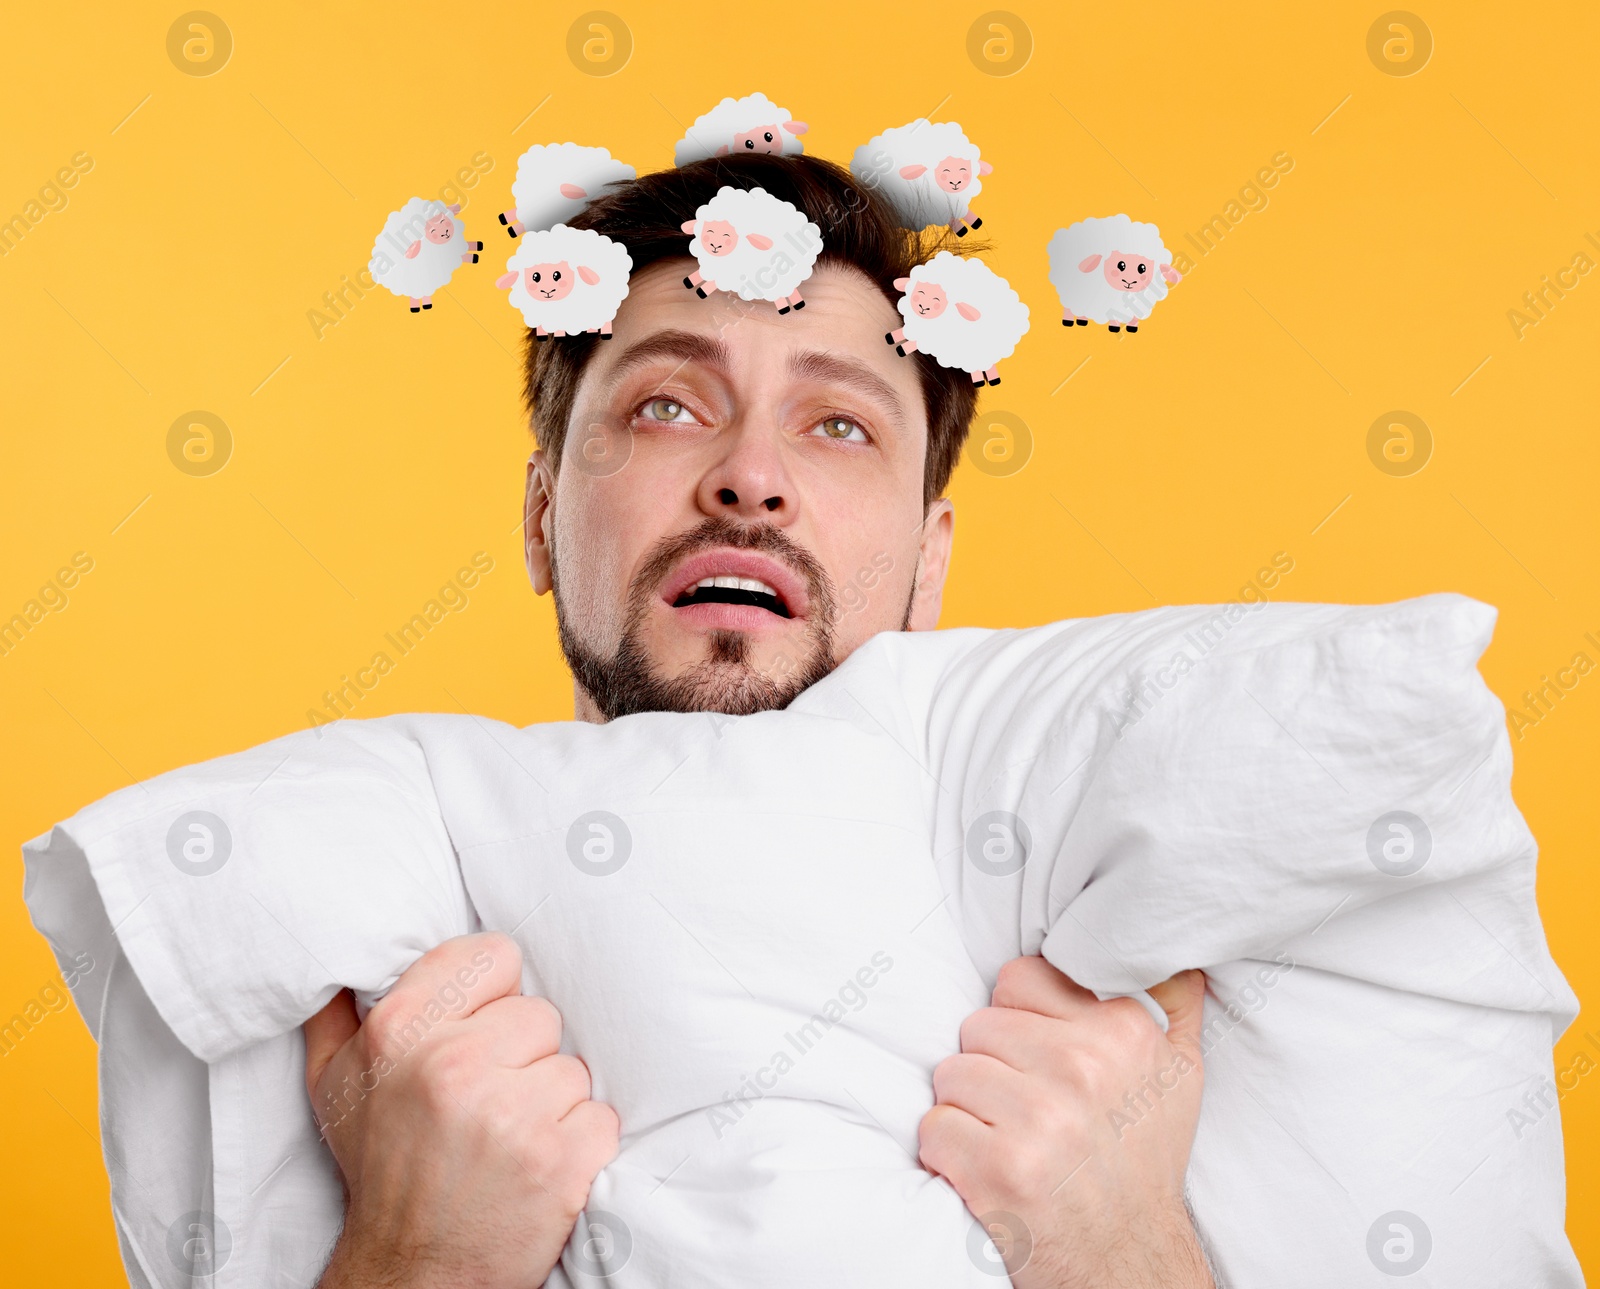 Image of Exhausted man with pillow suffering from insomnia on yellow background. Illustrations of sheep running around his head